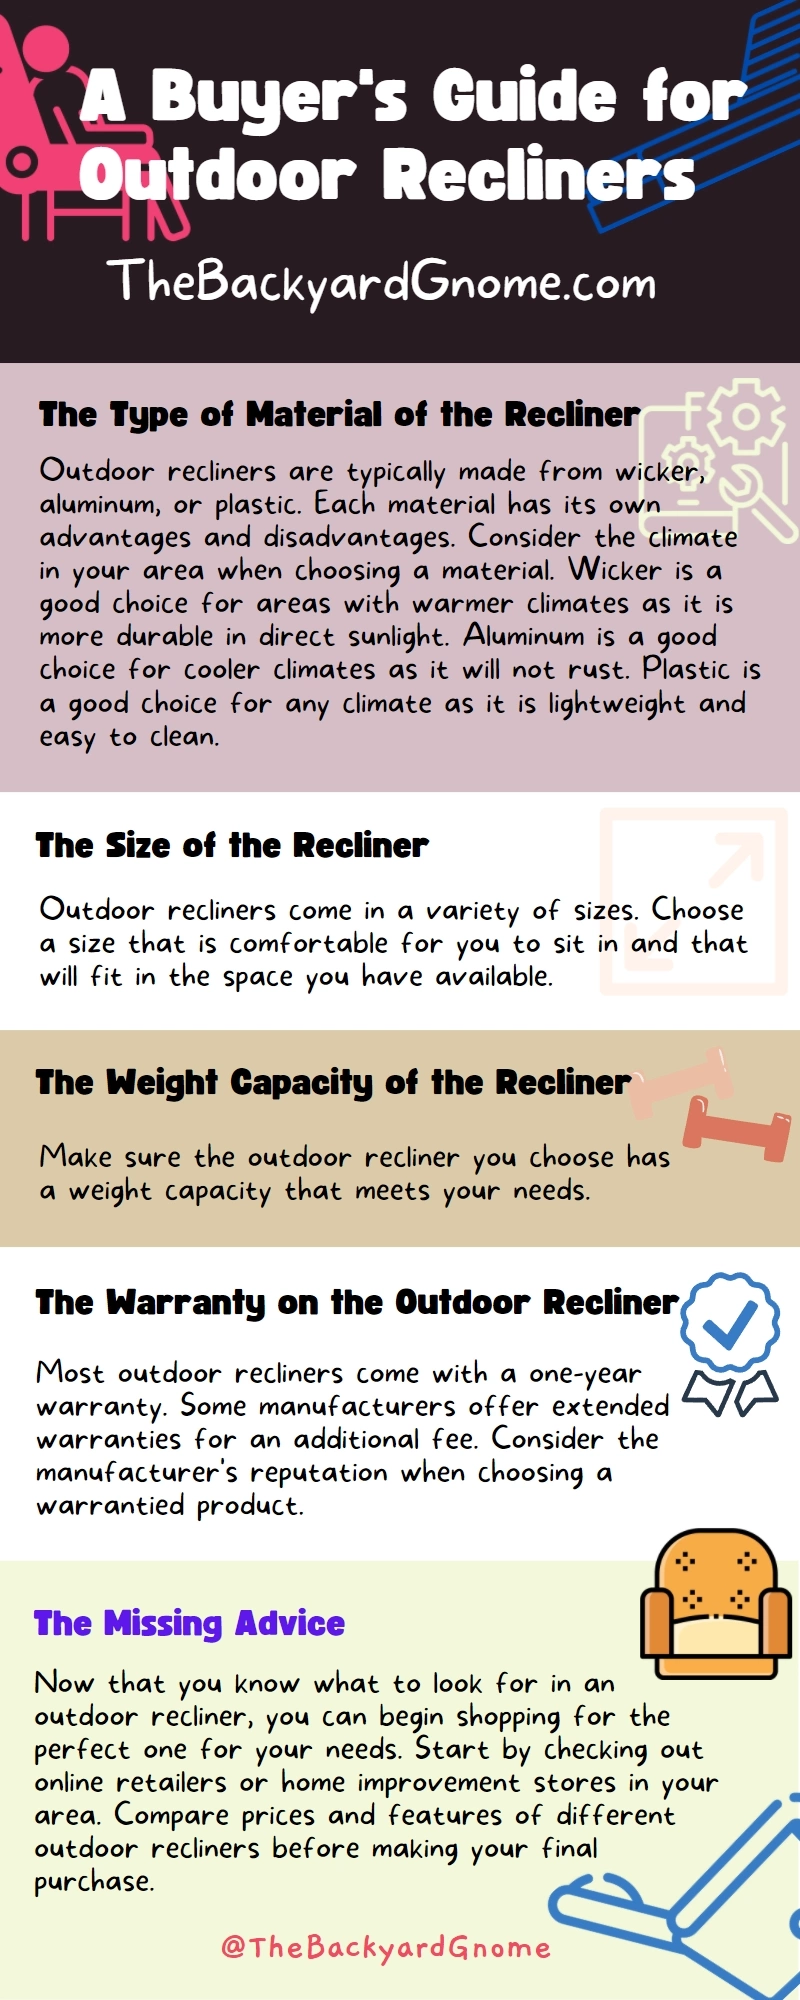 Infographic about a Buyer's Guide for Outdoor Recliners